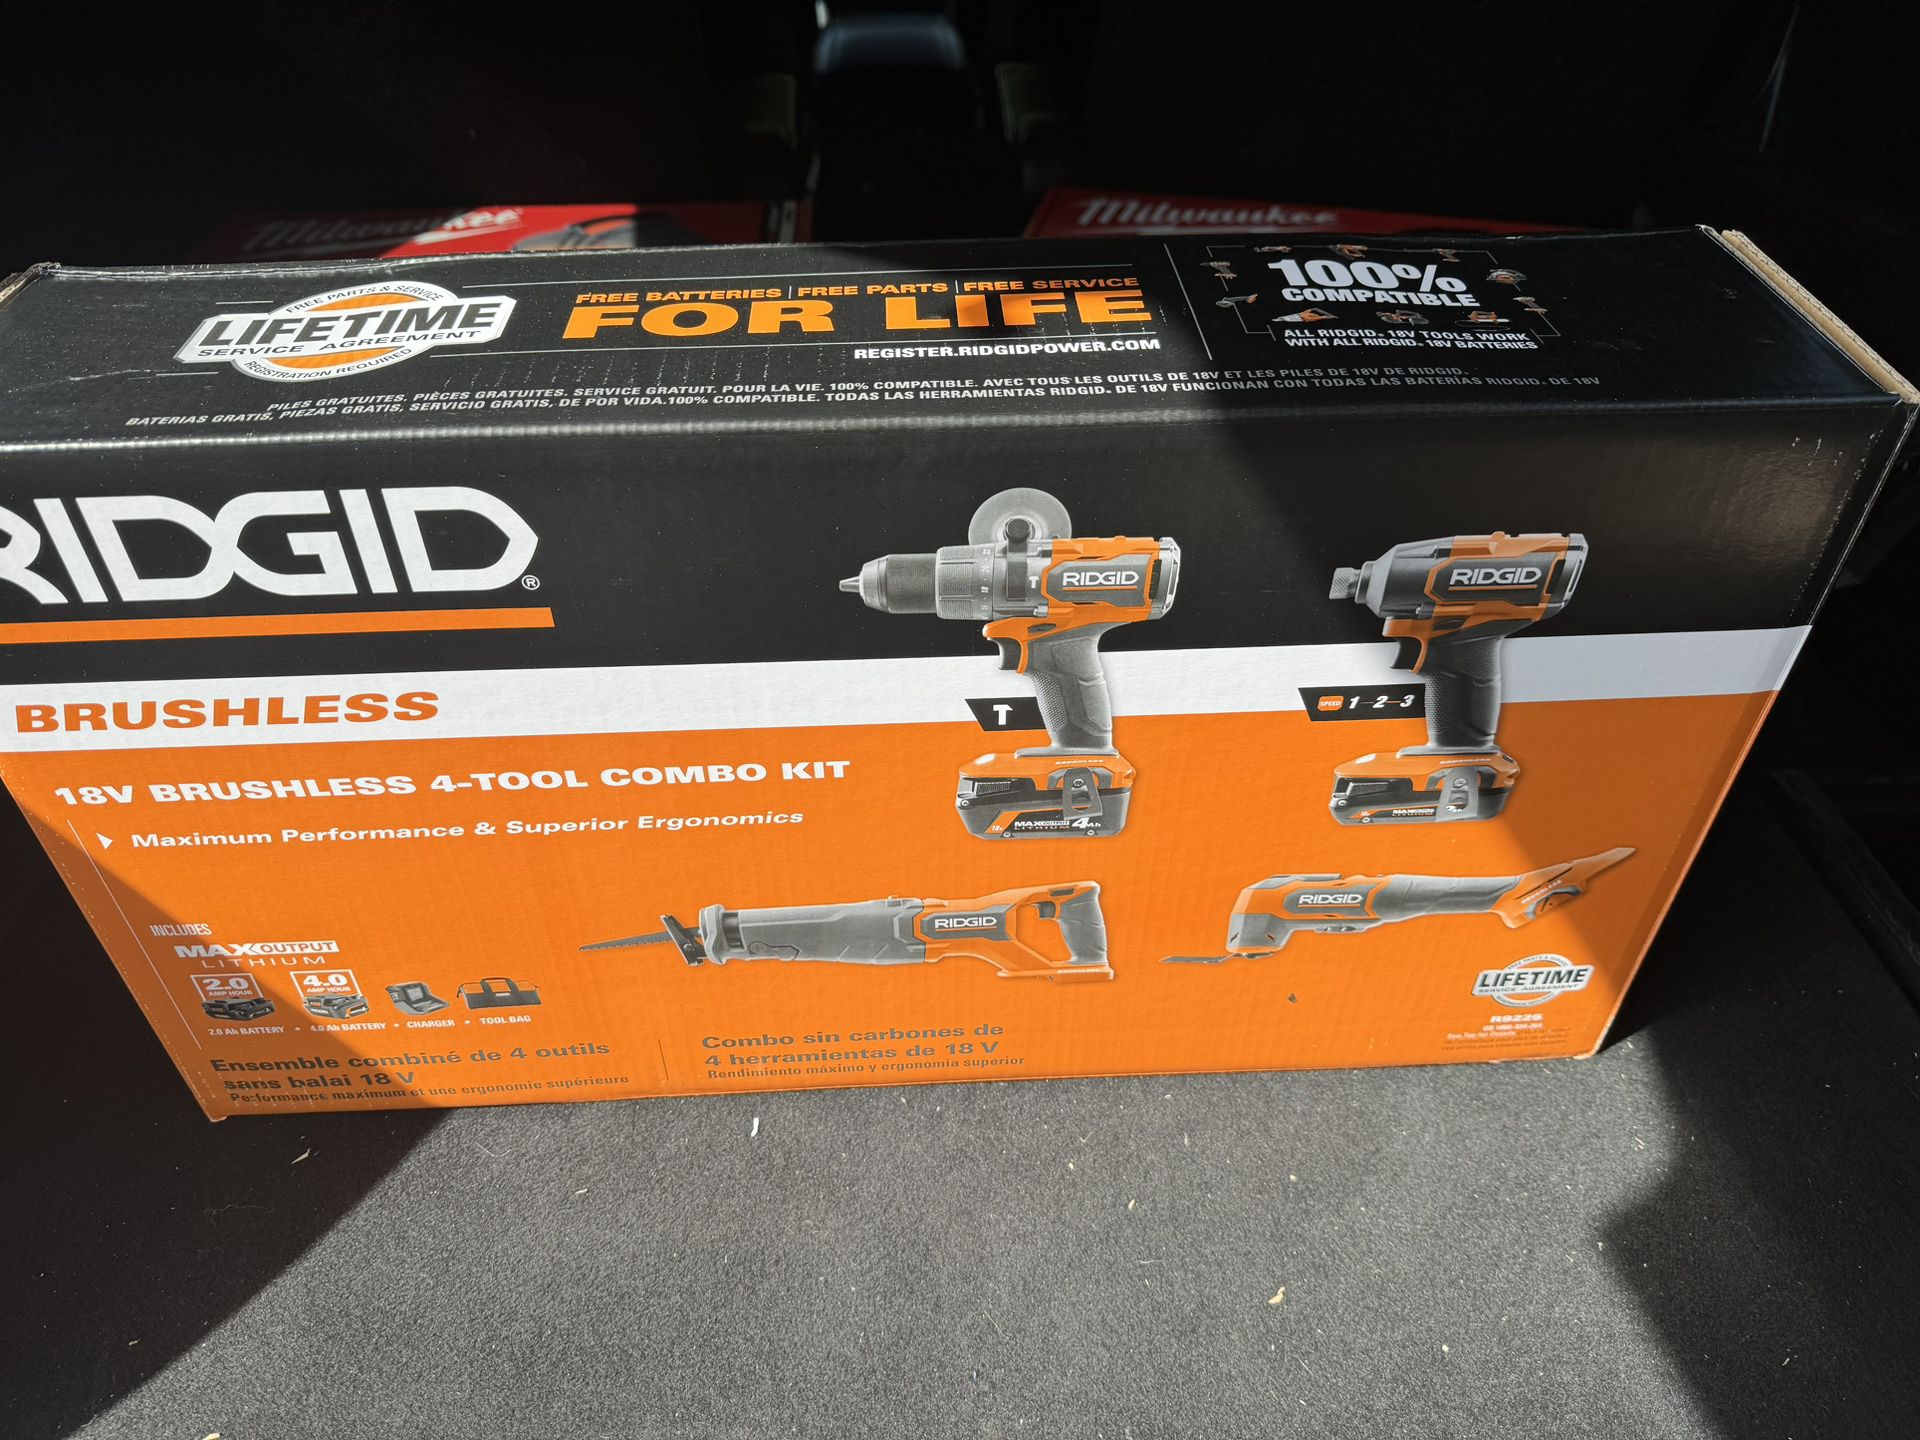 RIDGID 18V Brushless Cordless 4-Tool Combo Kit with (1) 4.0 Ah and (1) 2.0 Ah MAX Output Batteries, 18V Charger, and Tool Bag *NEW